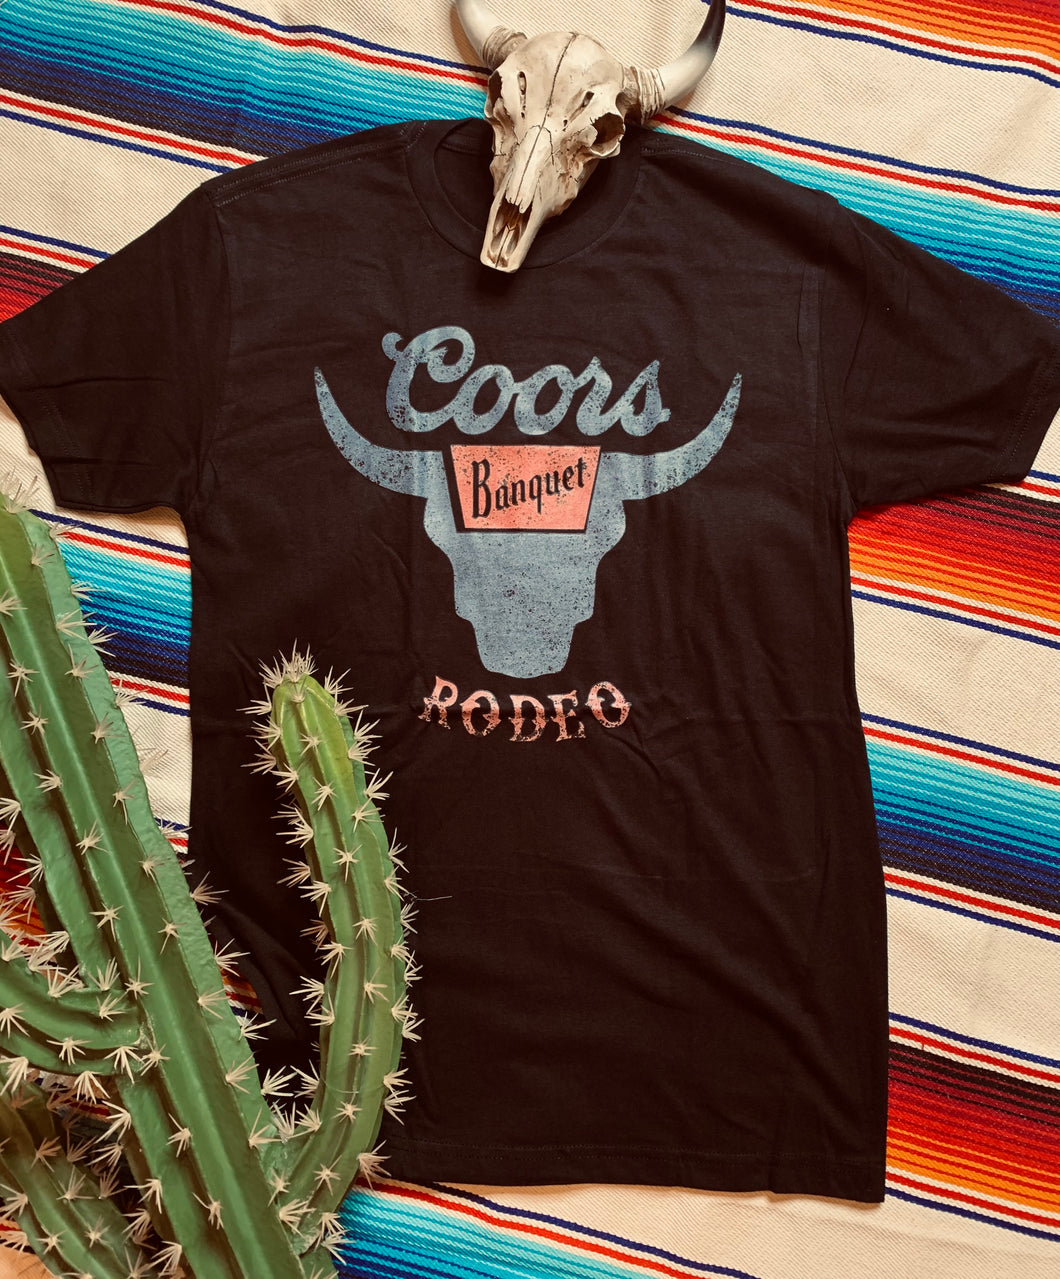 Coors rodeo in black tee